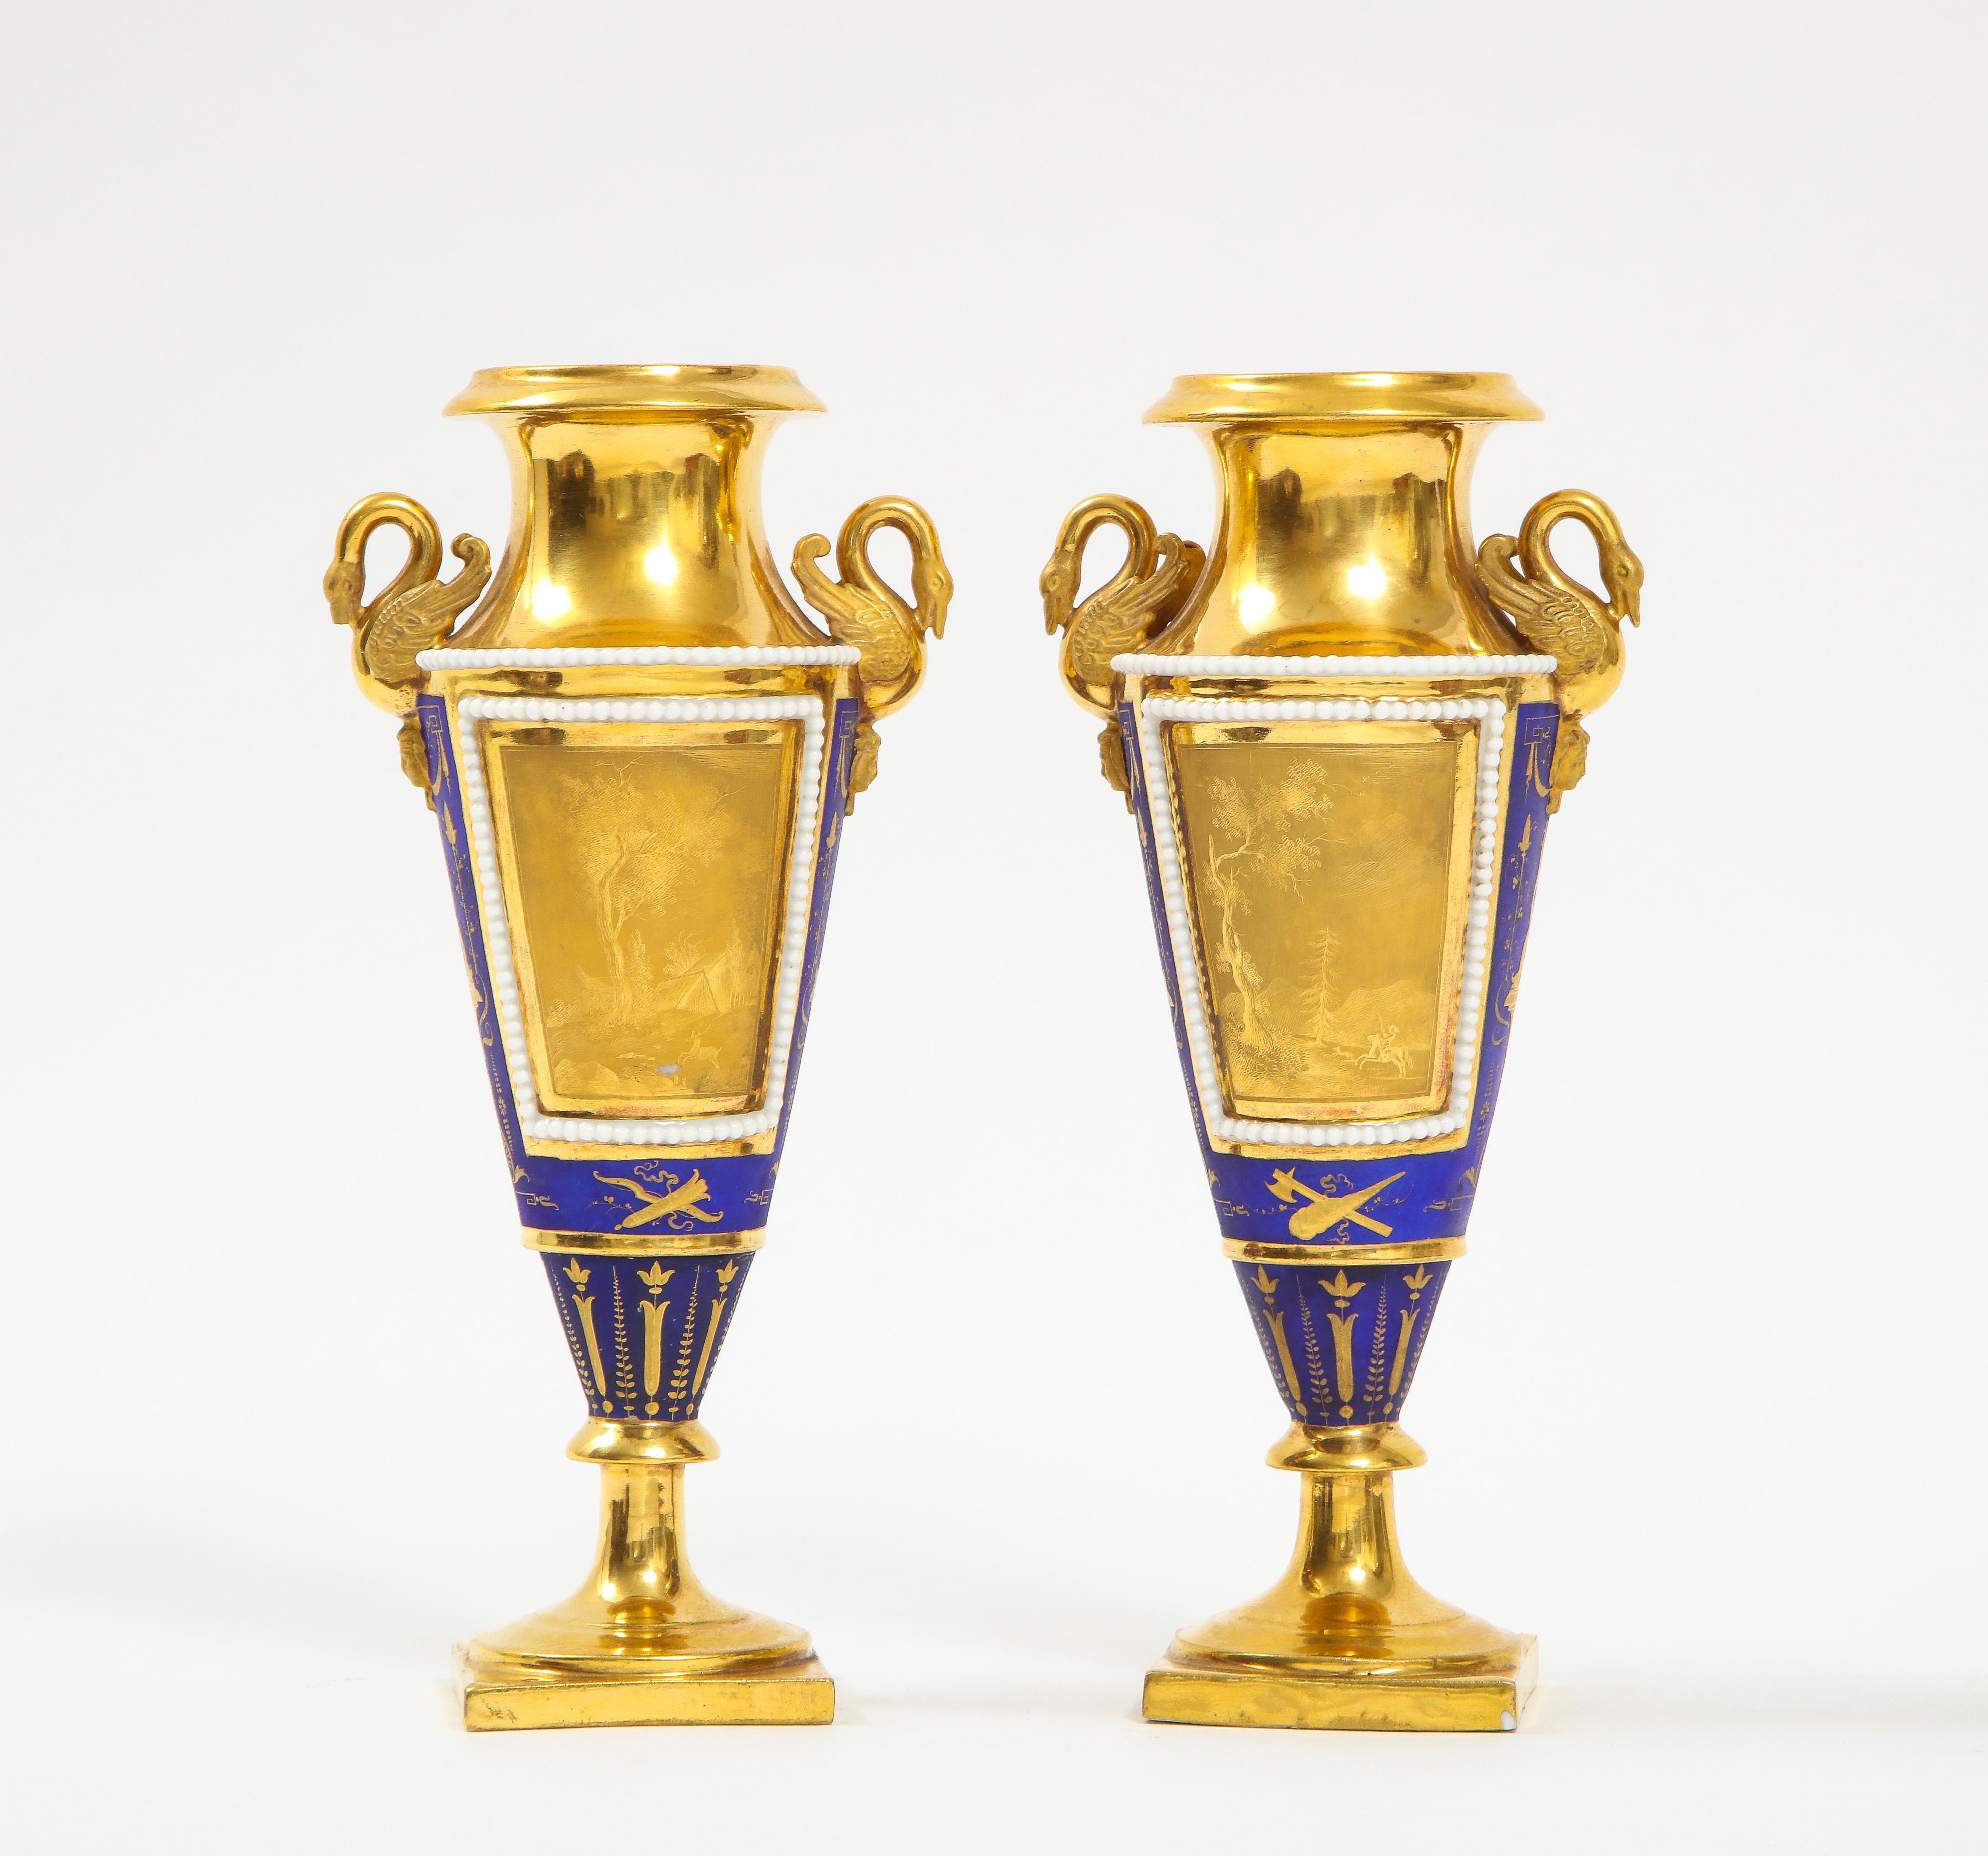 A fantastic quality pair of Russian Empire cobalt blue and gold ground swan handle porcelain vases. Each piece is of Amphora form with a gorgeous 24K gold matted, burnished, and shiny front and backside decoration. The front panels consist of a